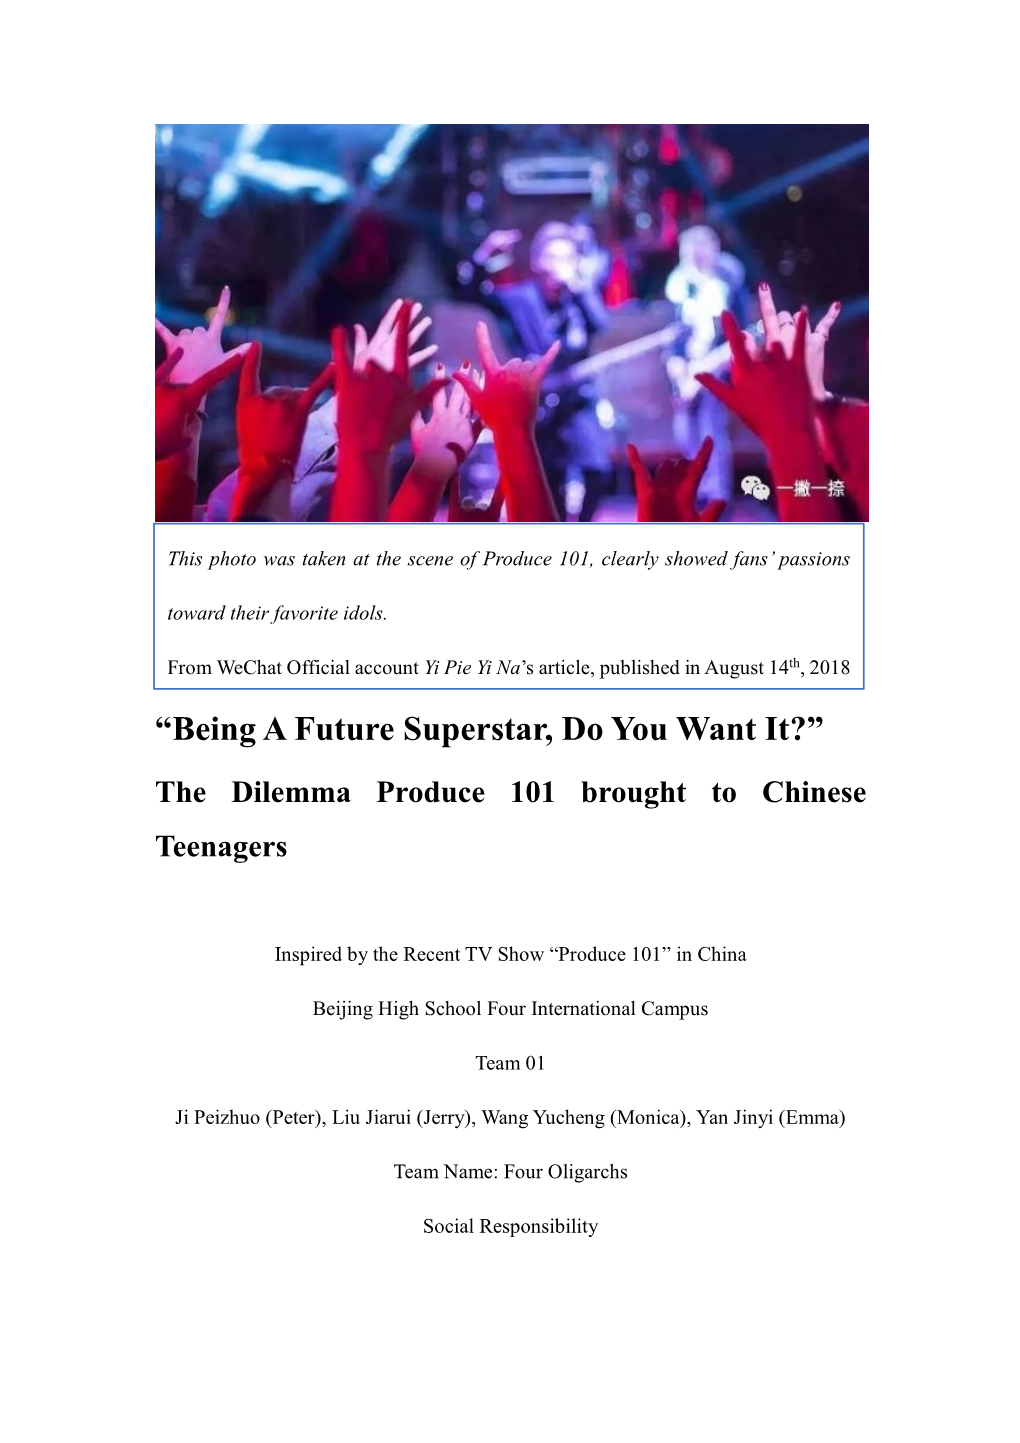 “Being a Future Superstar, Do You Want It?” the Dilemma Produce 101 Brought to Chinese Teenagers